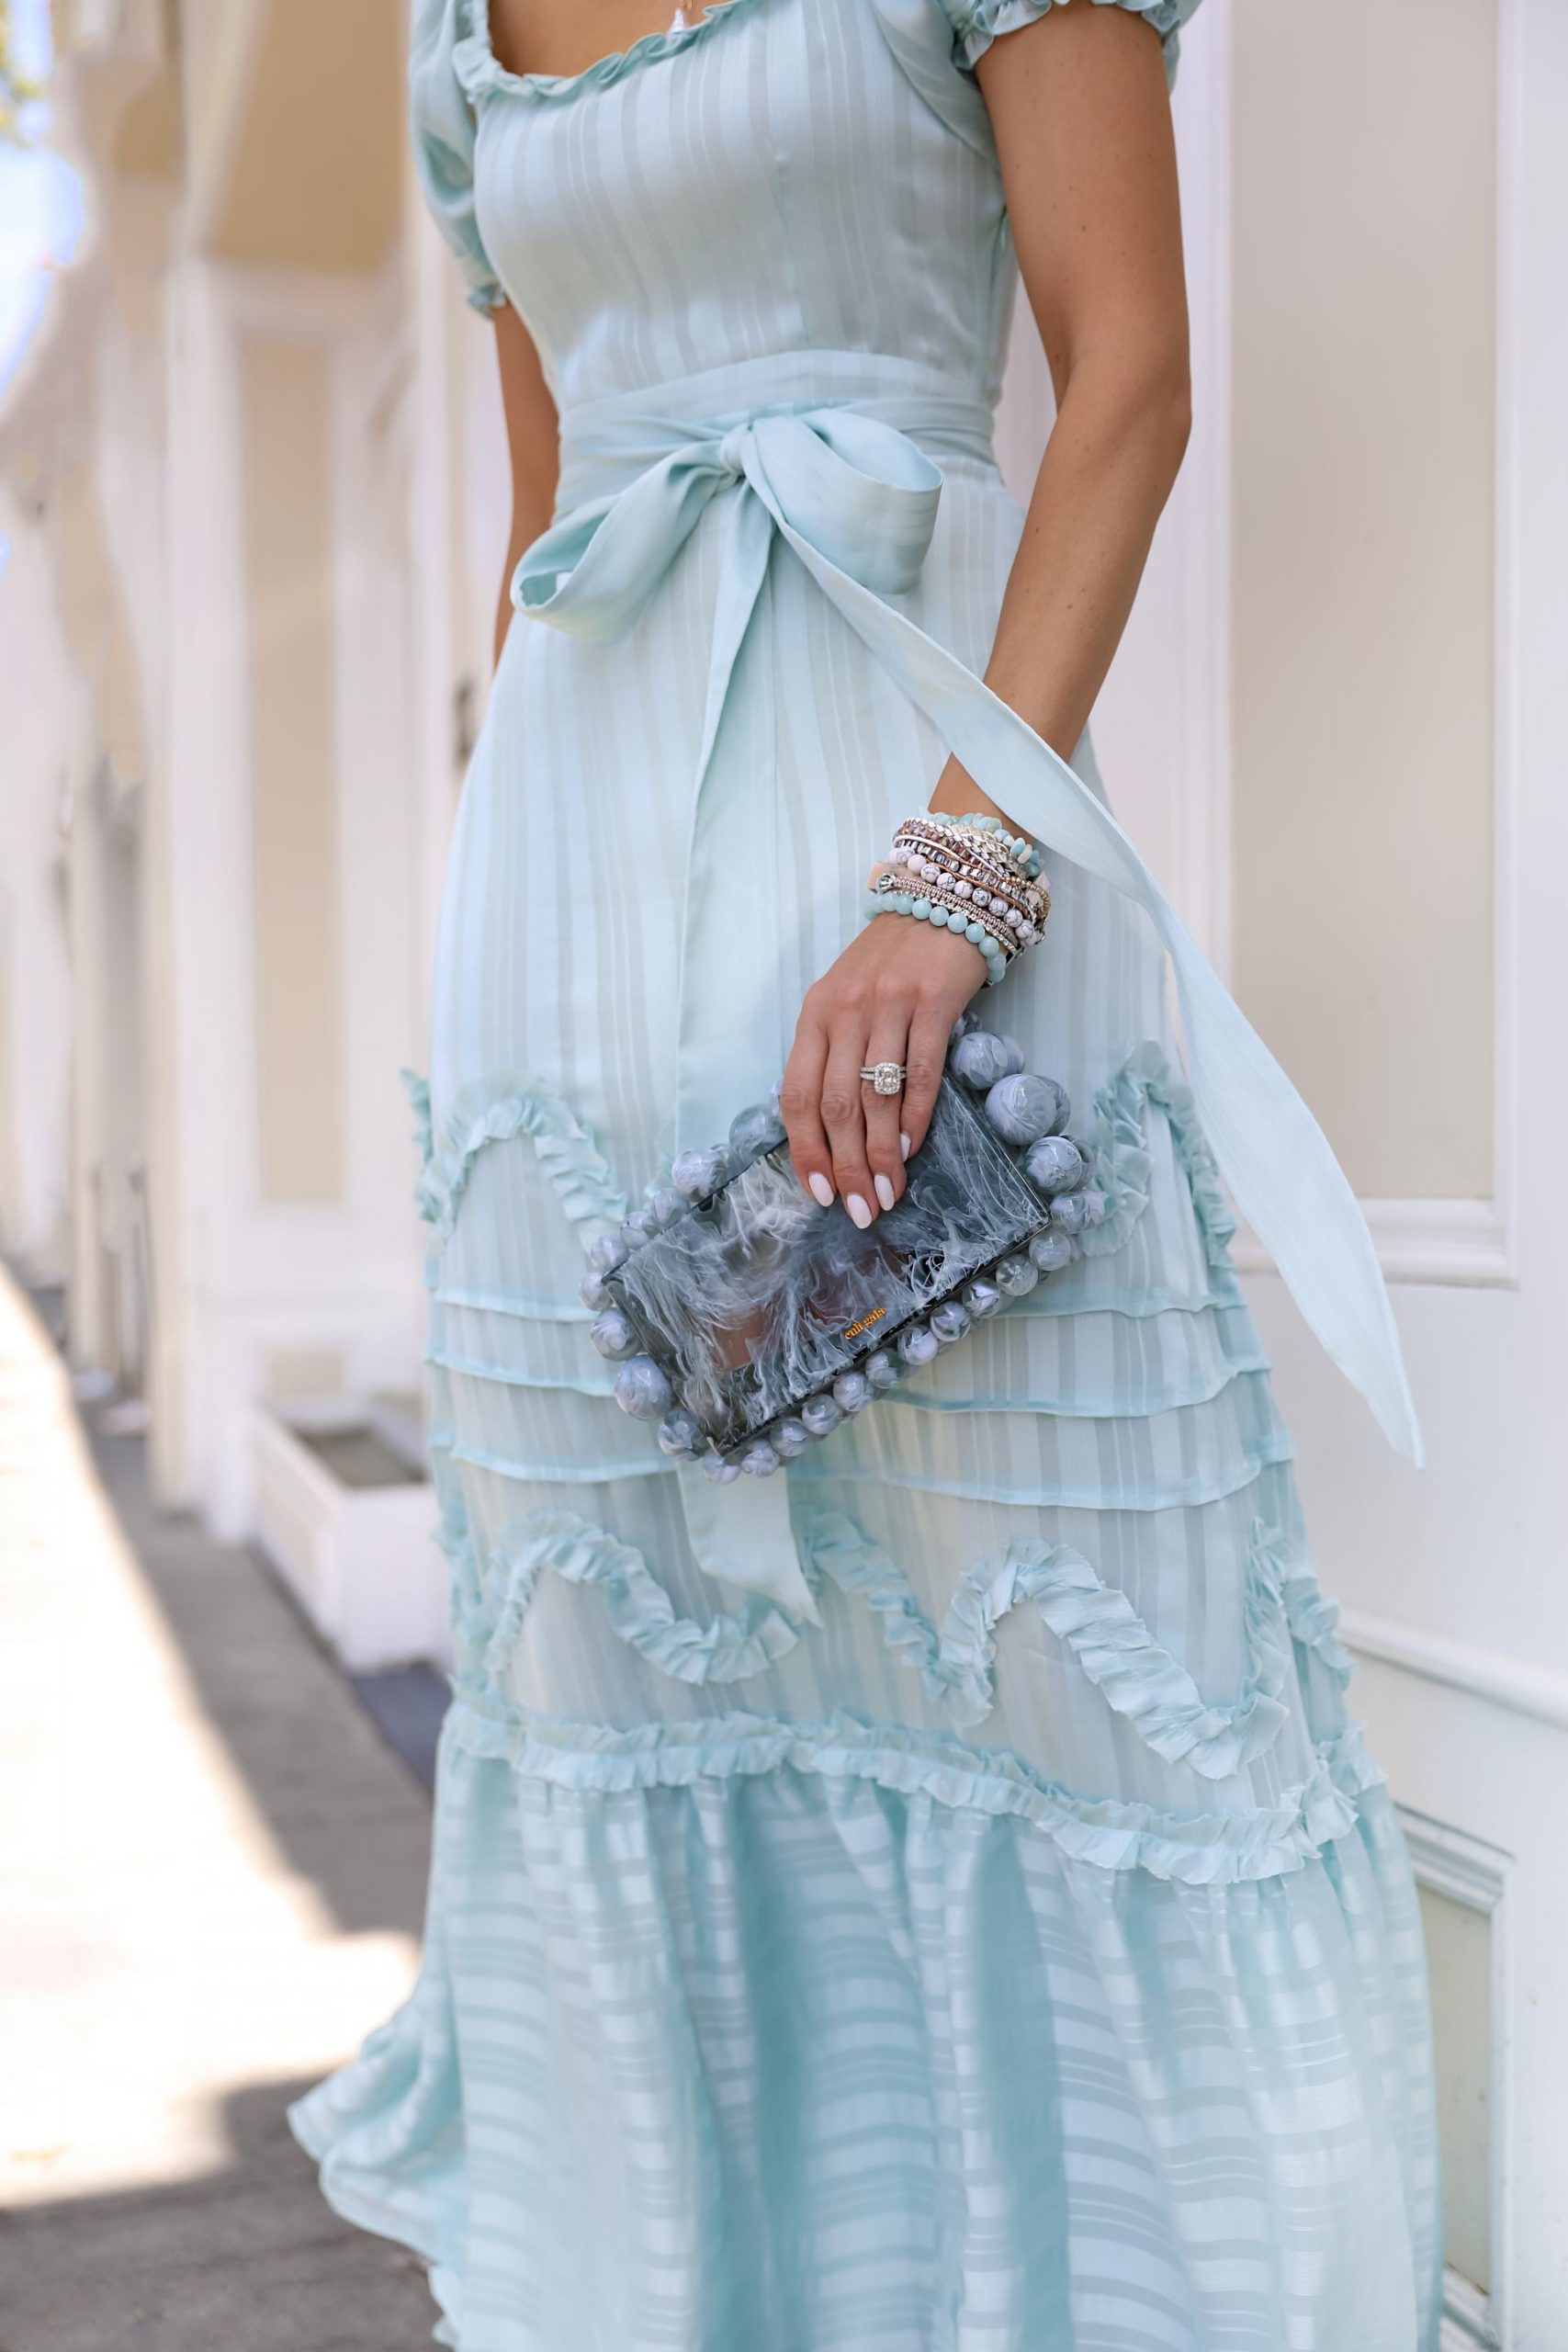 Bridgerton style with boho accessories, wedding guest inspiration by Lombard & Fifth Veronica Levy.